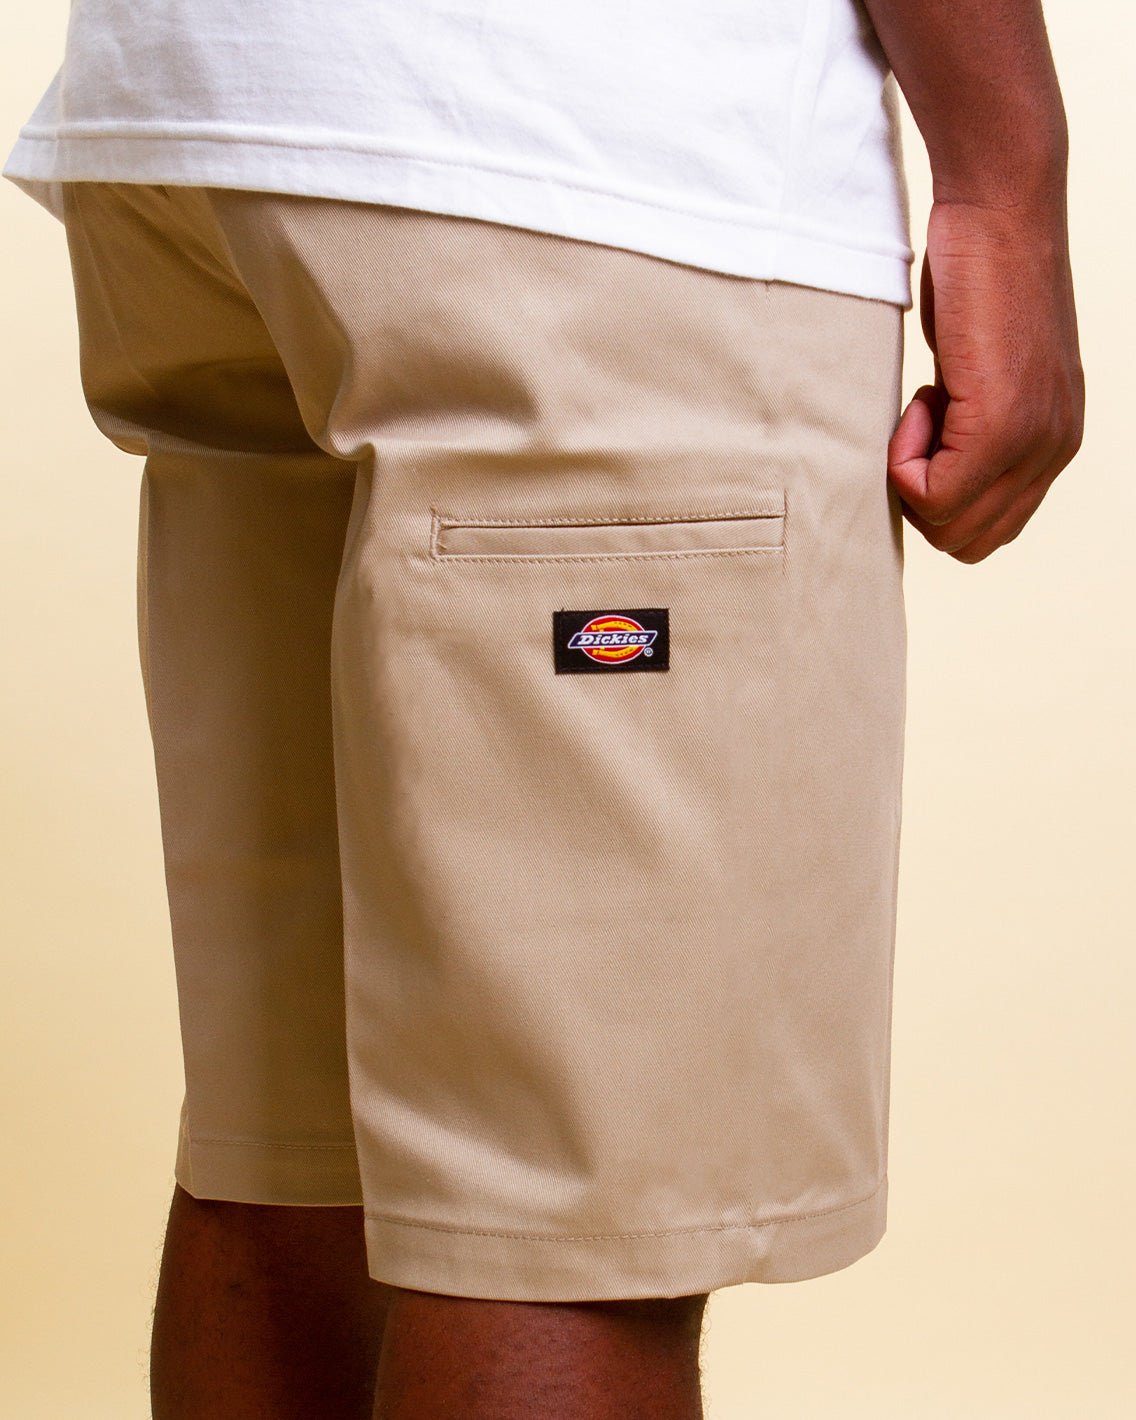 Designed for everyday wear, the Dickies 131 Slim Straight Short are constructed from a tough poly-cotton twill. These khaki shorts feature multi-use pockets, tunnel belt loops, wrinkle resistance and a clasp waist clip. The perfect short for any activity you throw at them.